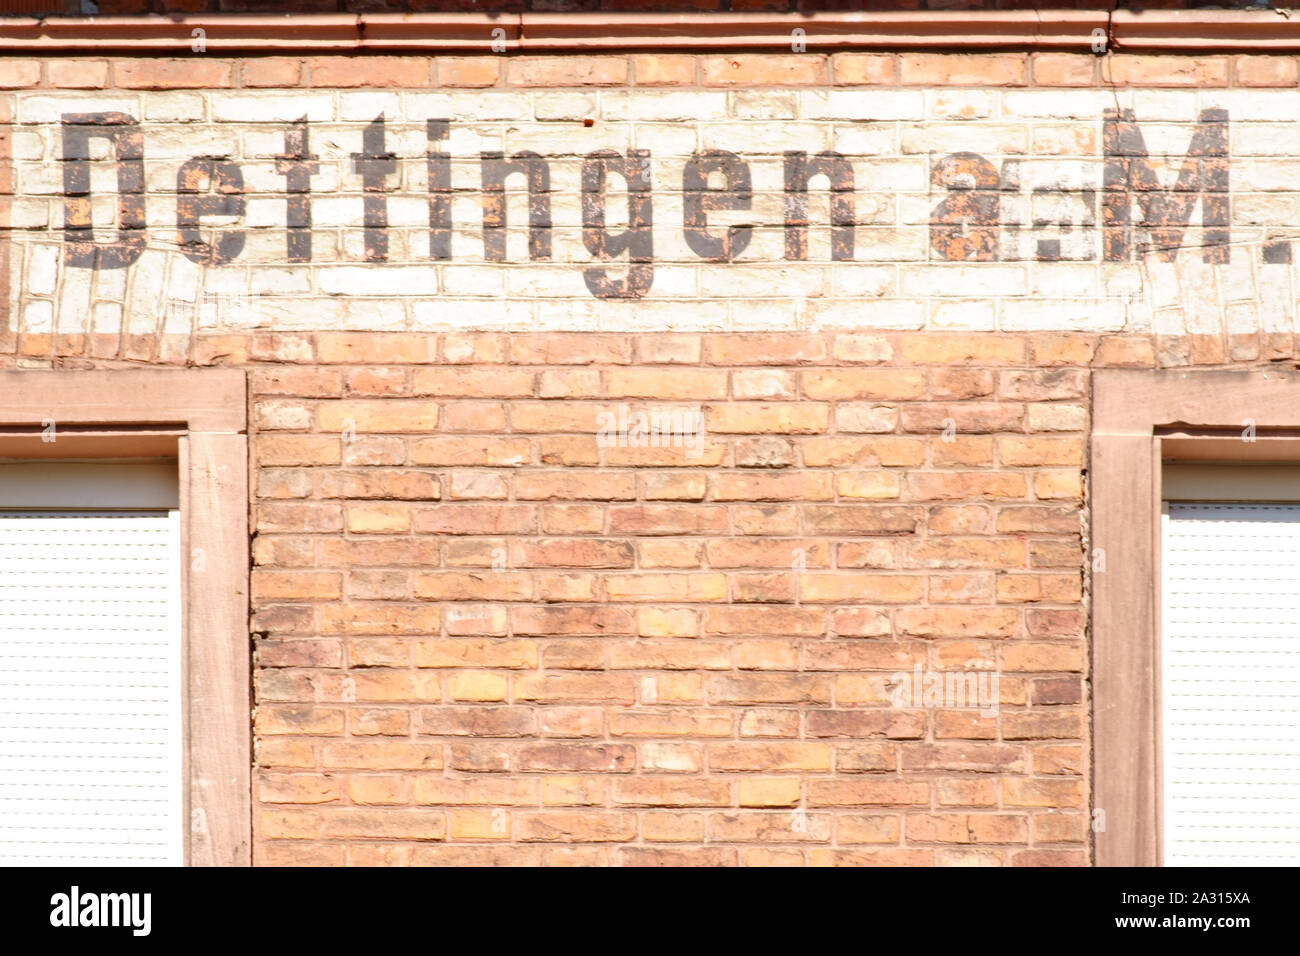 The name tag of the city Dettingen at the brick facade of an old building. Stock Photo